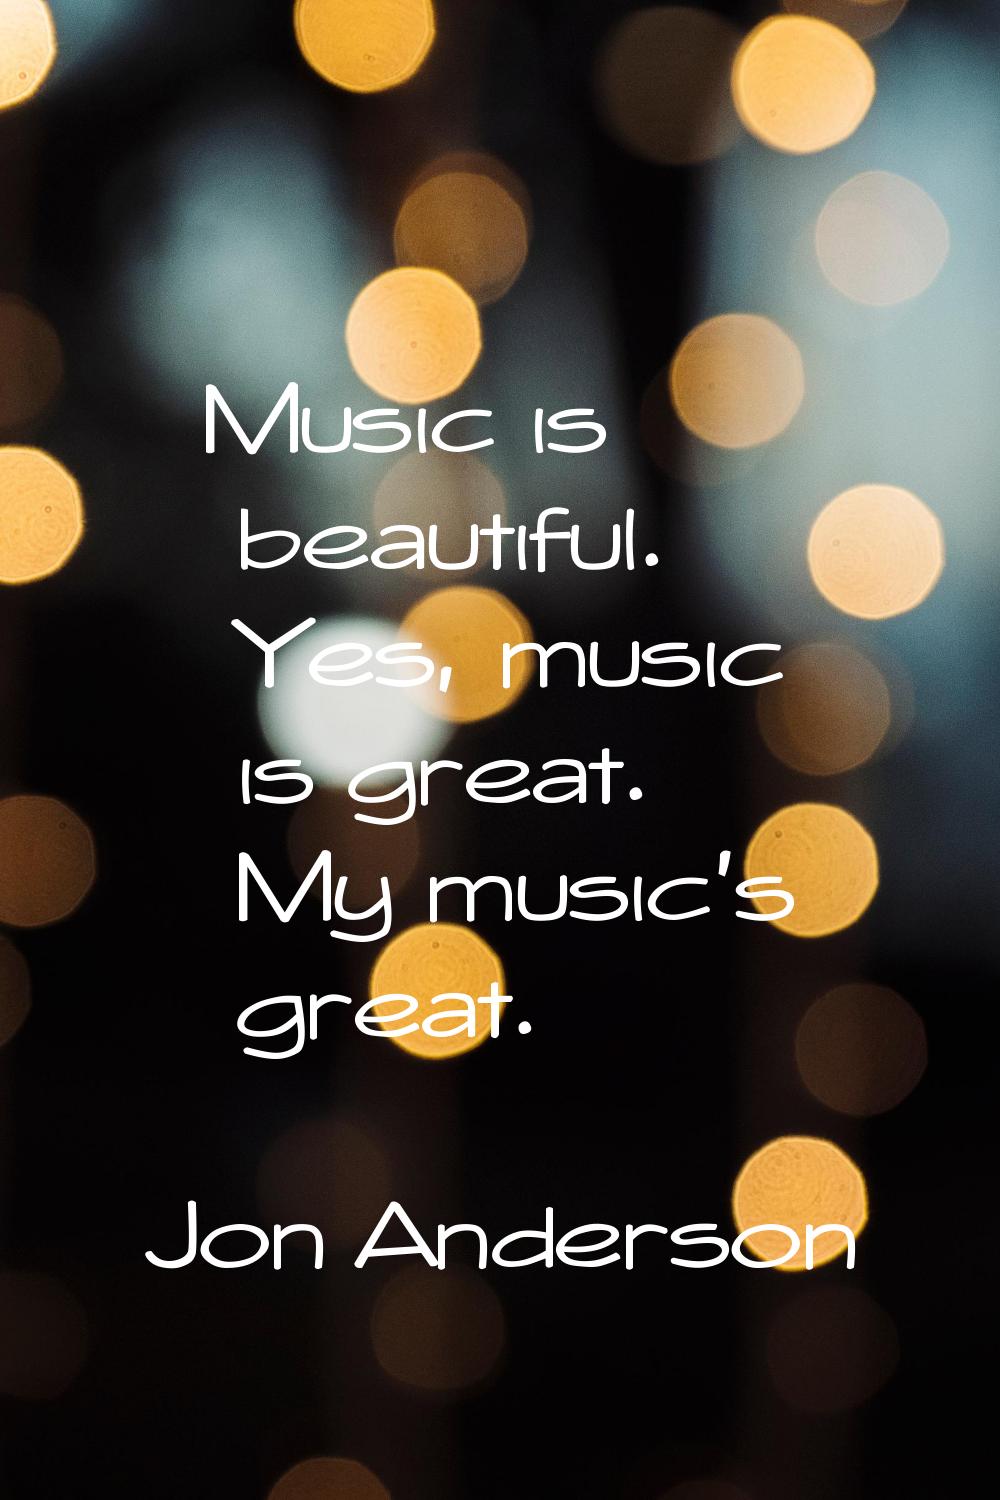 Music is beautiful. Yes, music is great. My music's great.